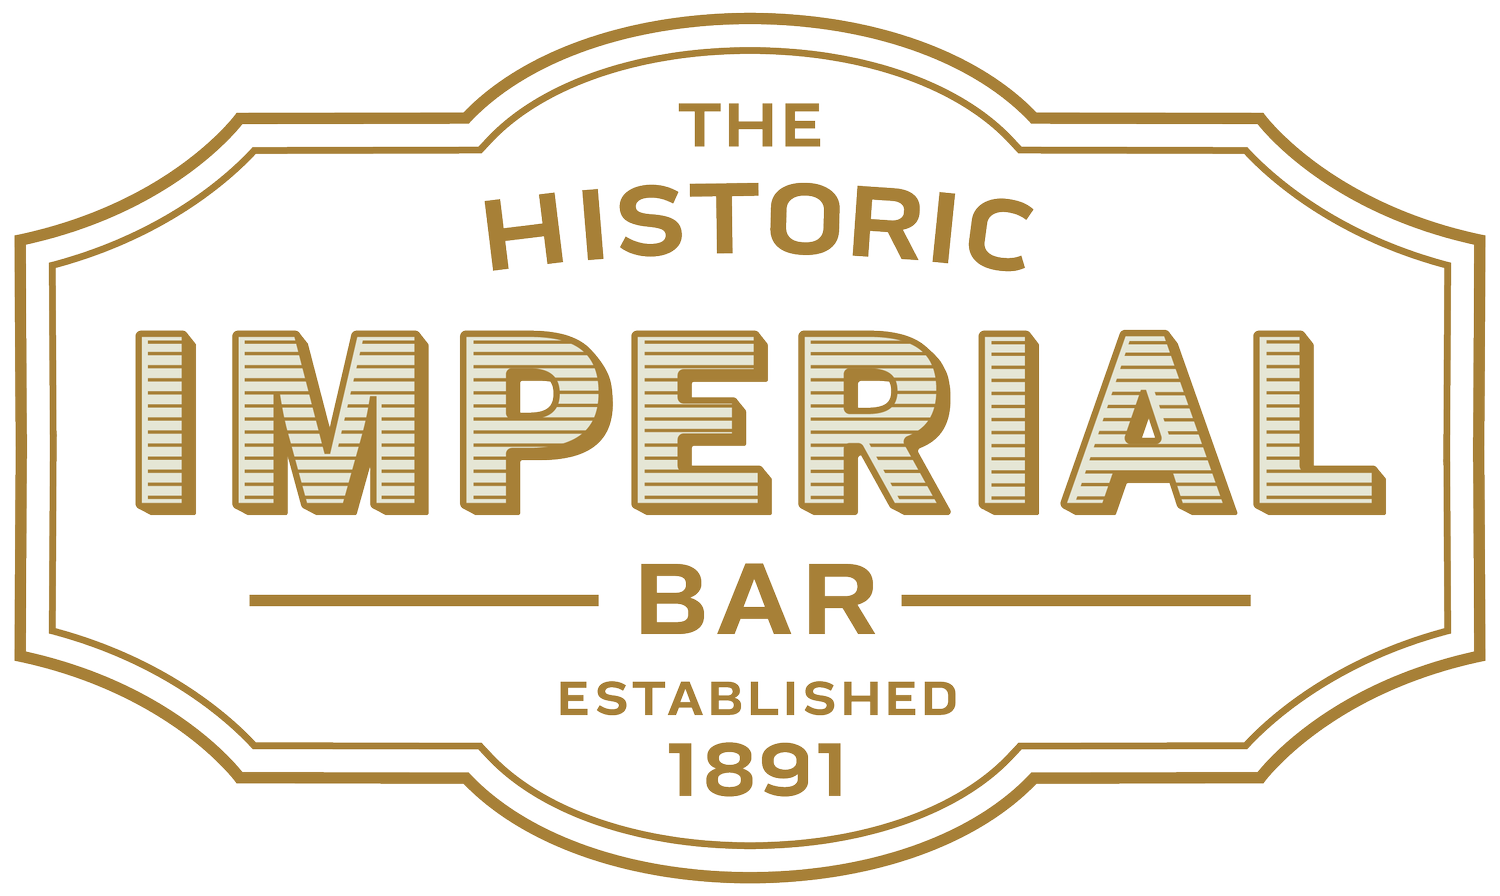 IMPERIAL BAR AND GRILL